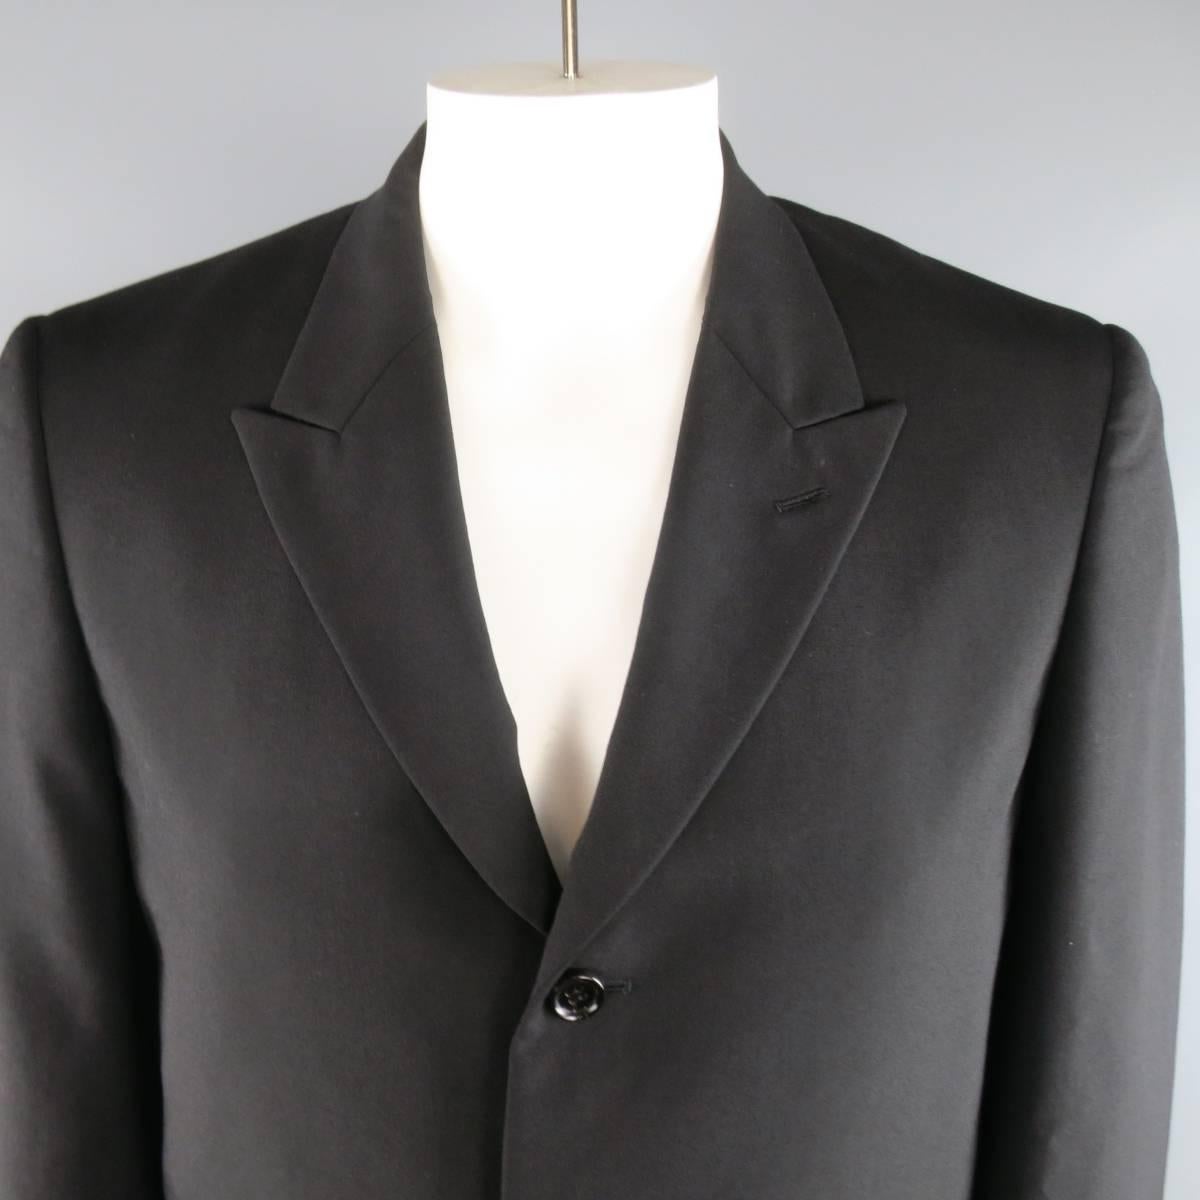 COMME des GARCONS HOMME PLUS sport coat comes in a light weight black wool and features a boxy silhouette, peak lapel, three button closure, and metallic gold and striped liner. Wear it inside out for a runway to street effect. Made in Japan.
